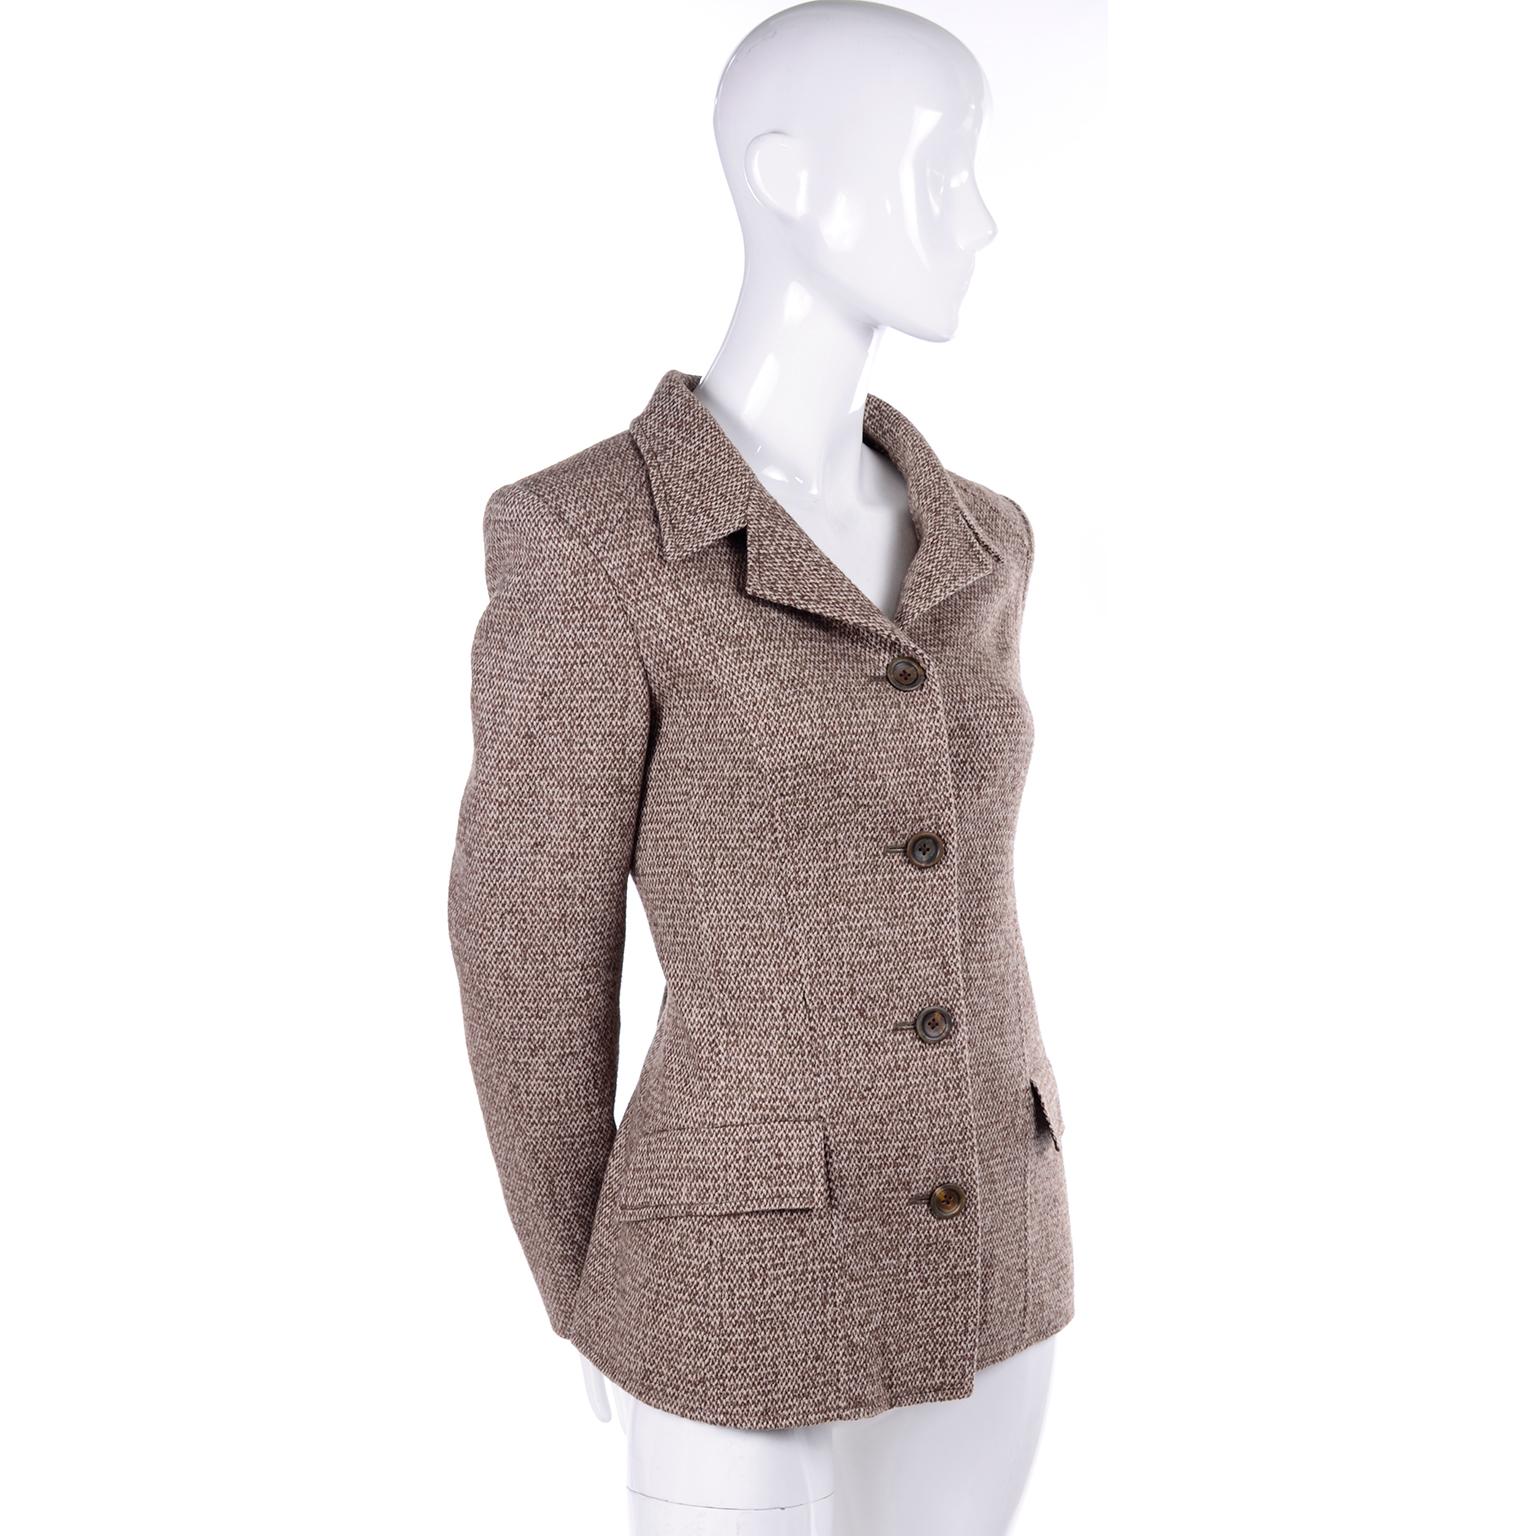 This is a great Oscar de la Renta four button blazer in a lovely brown tweed. This jacket has a notched collar and two flap pockets in front that are still sewn shut! What is unique about this jacket is the back. It has three large pleats at the